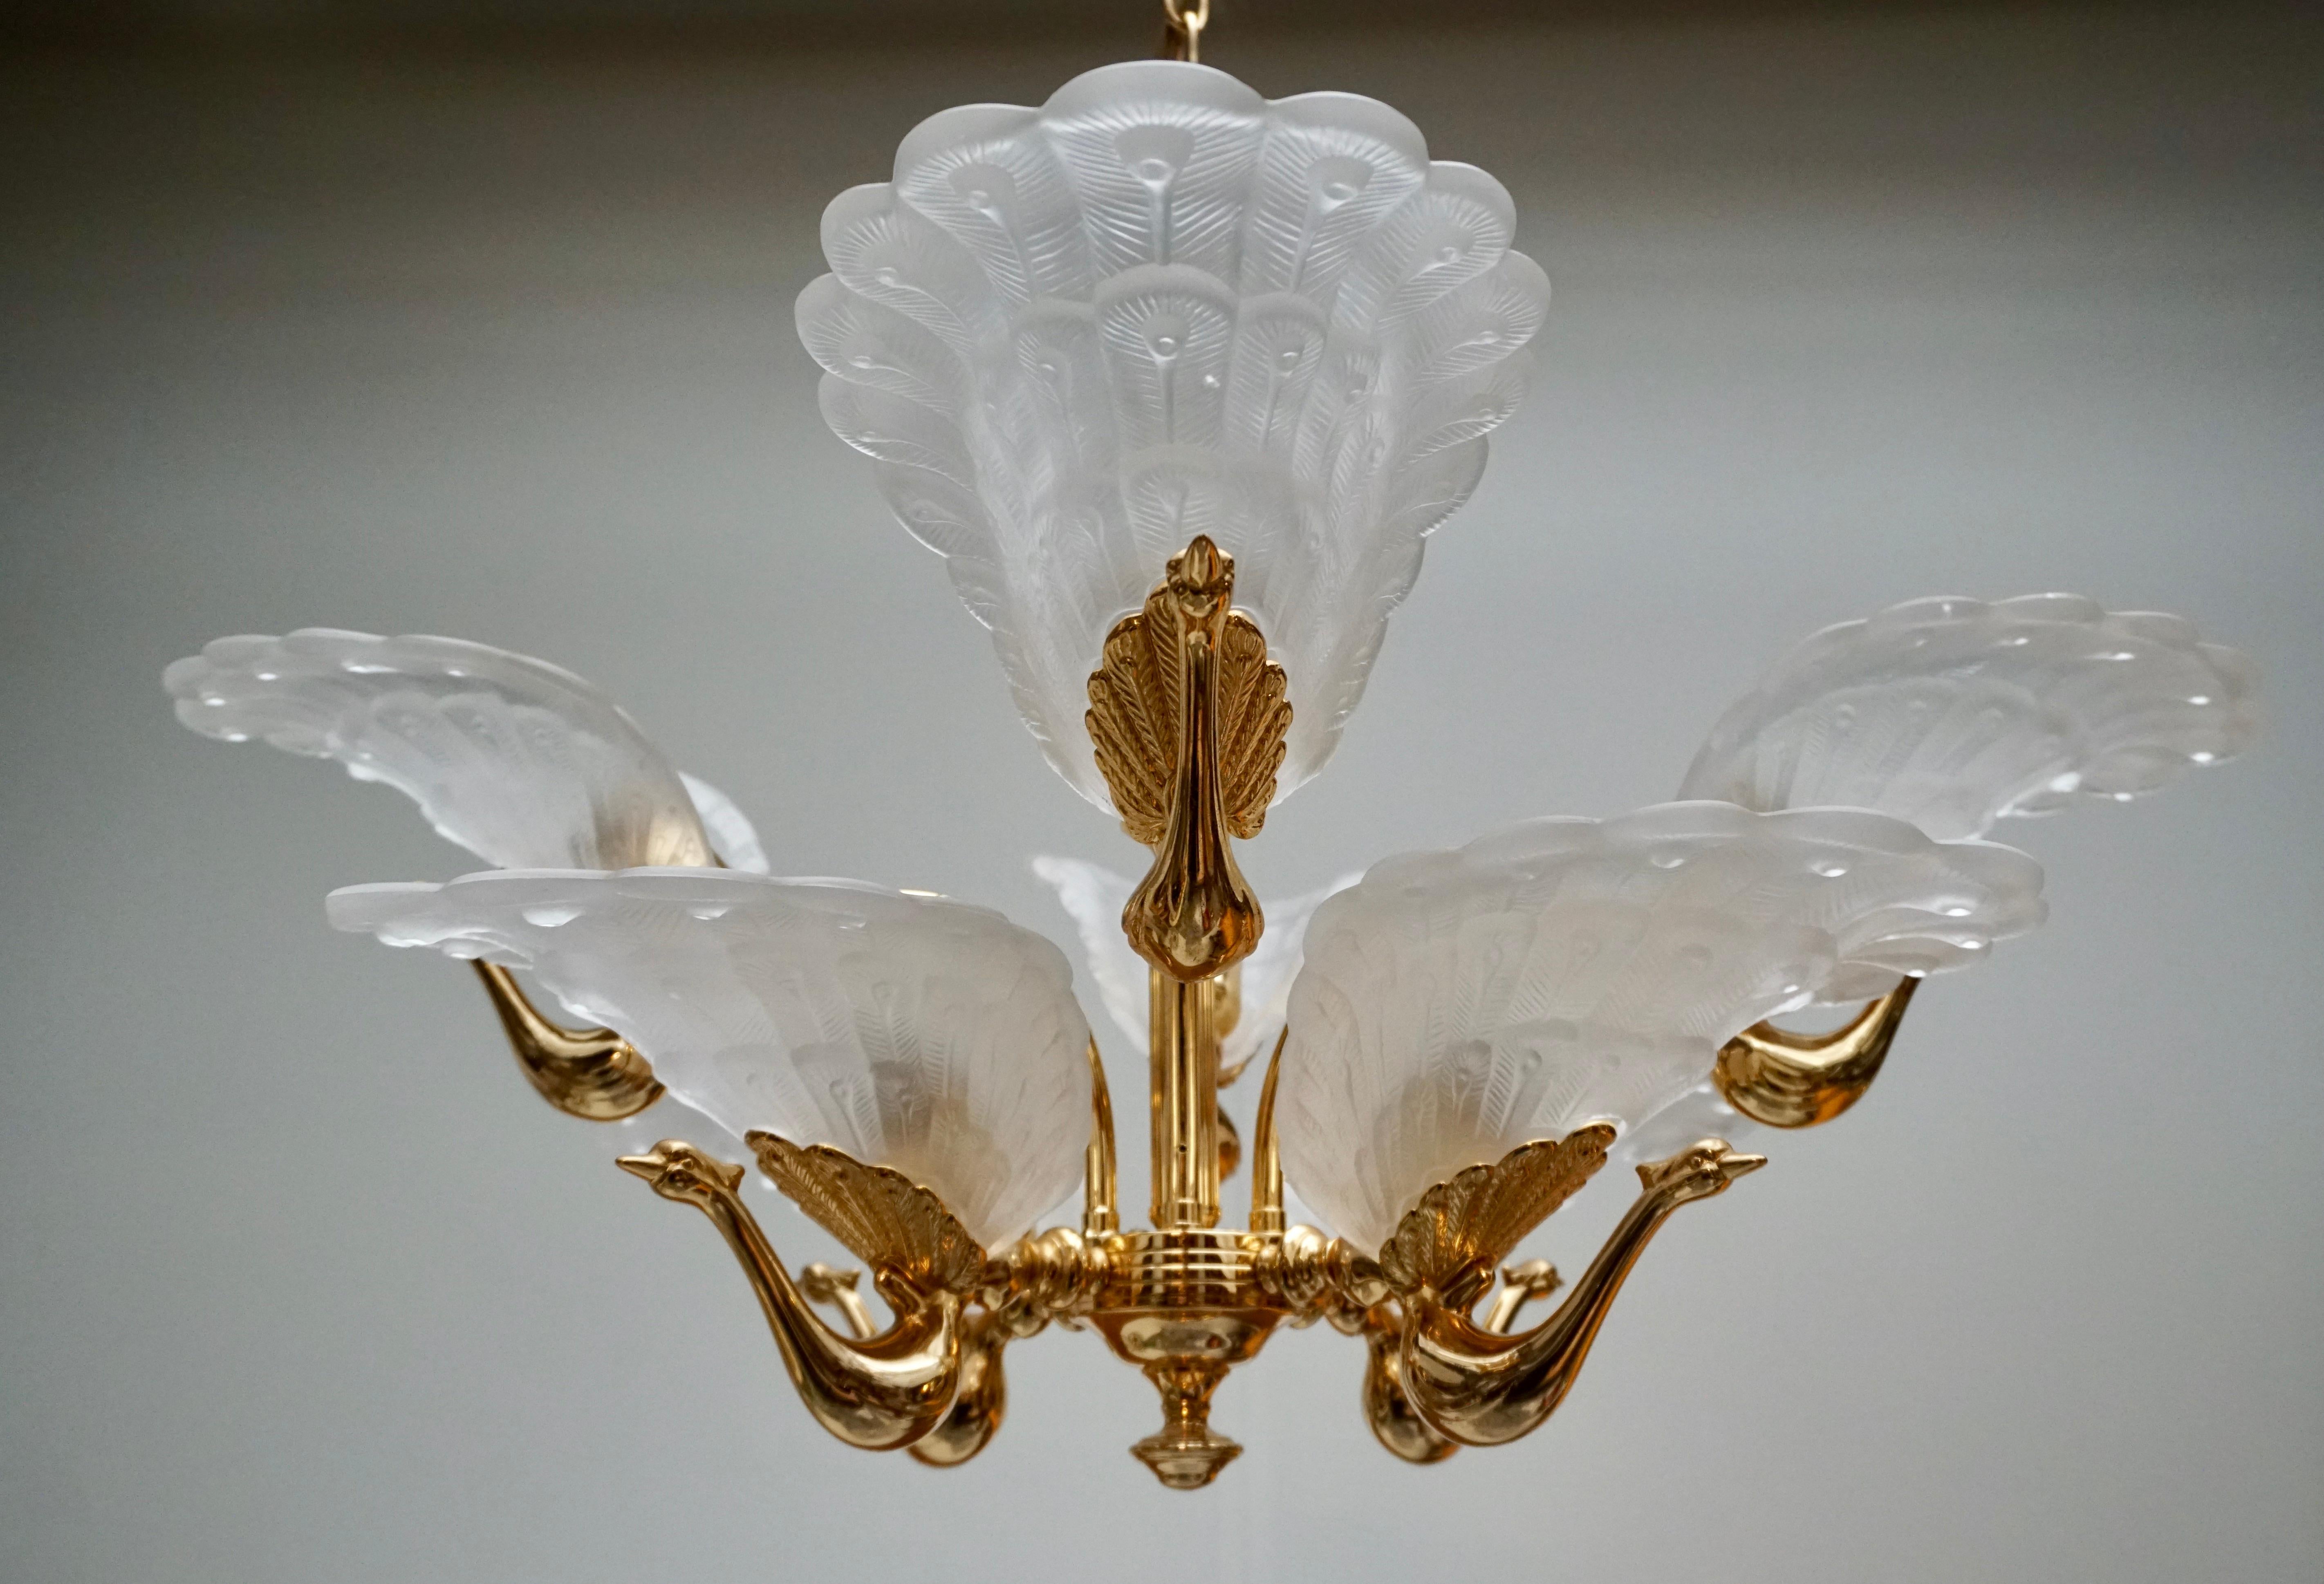 Frosted Rare Midcentury Chandelier / Pendant with Golden Bronze Glass Peacock Sculptures